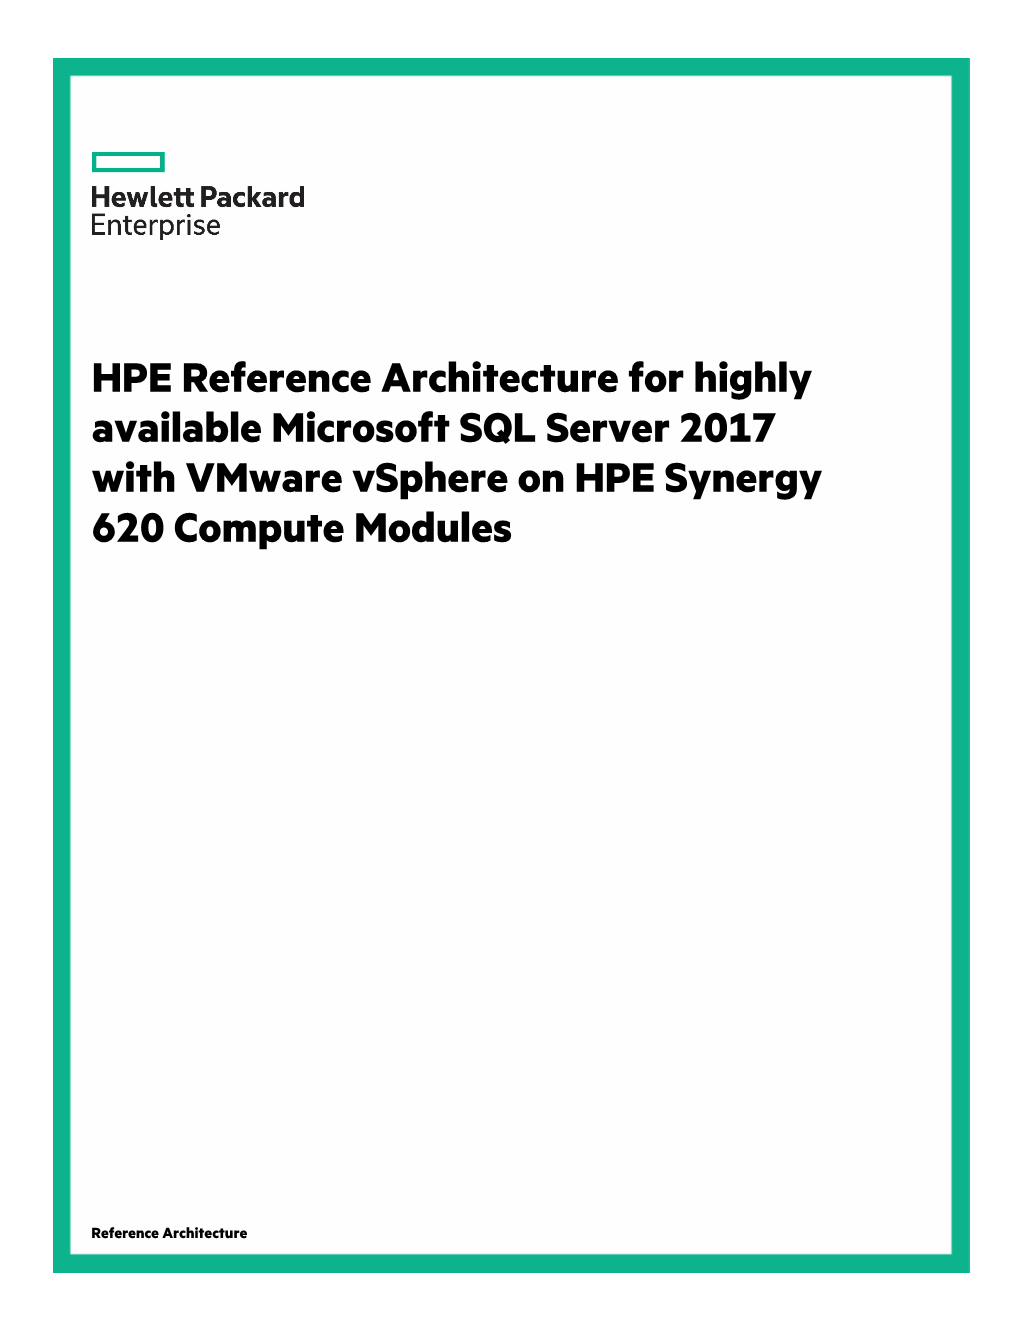 HPE Reference Architecture for Highly Available Microsoft SQL Server 2017 with Vmware Vsphere on HPE Synergy 620 Compute Modules